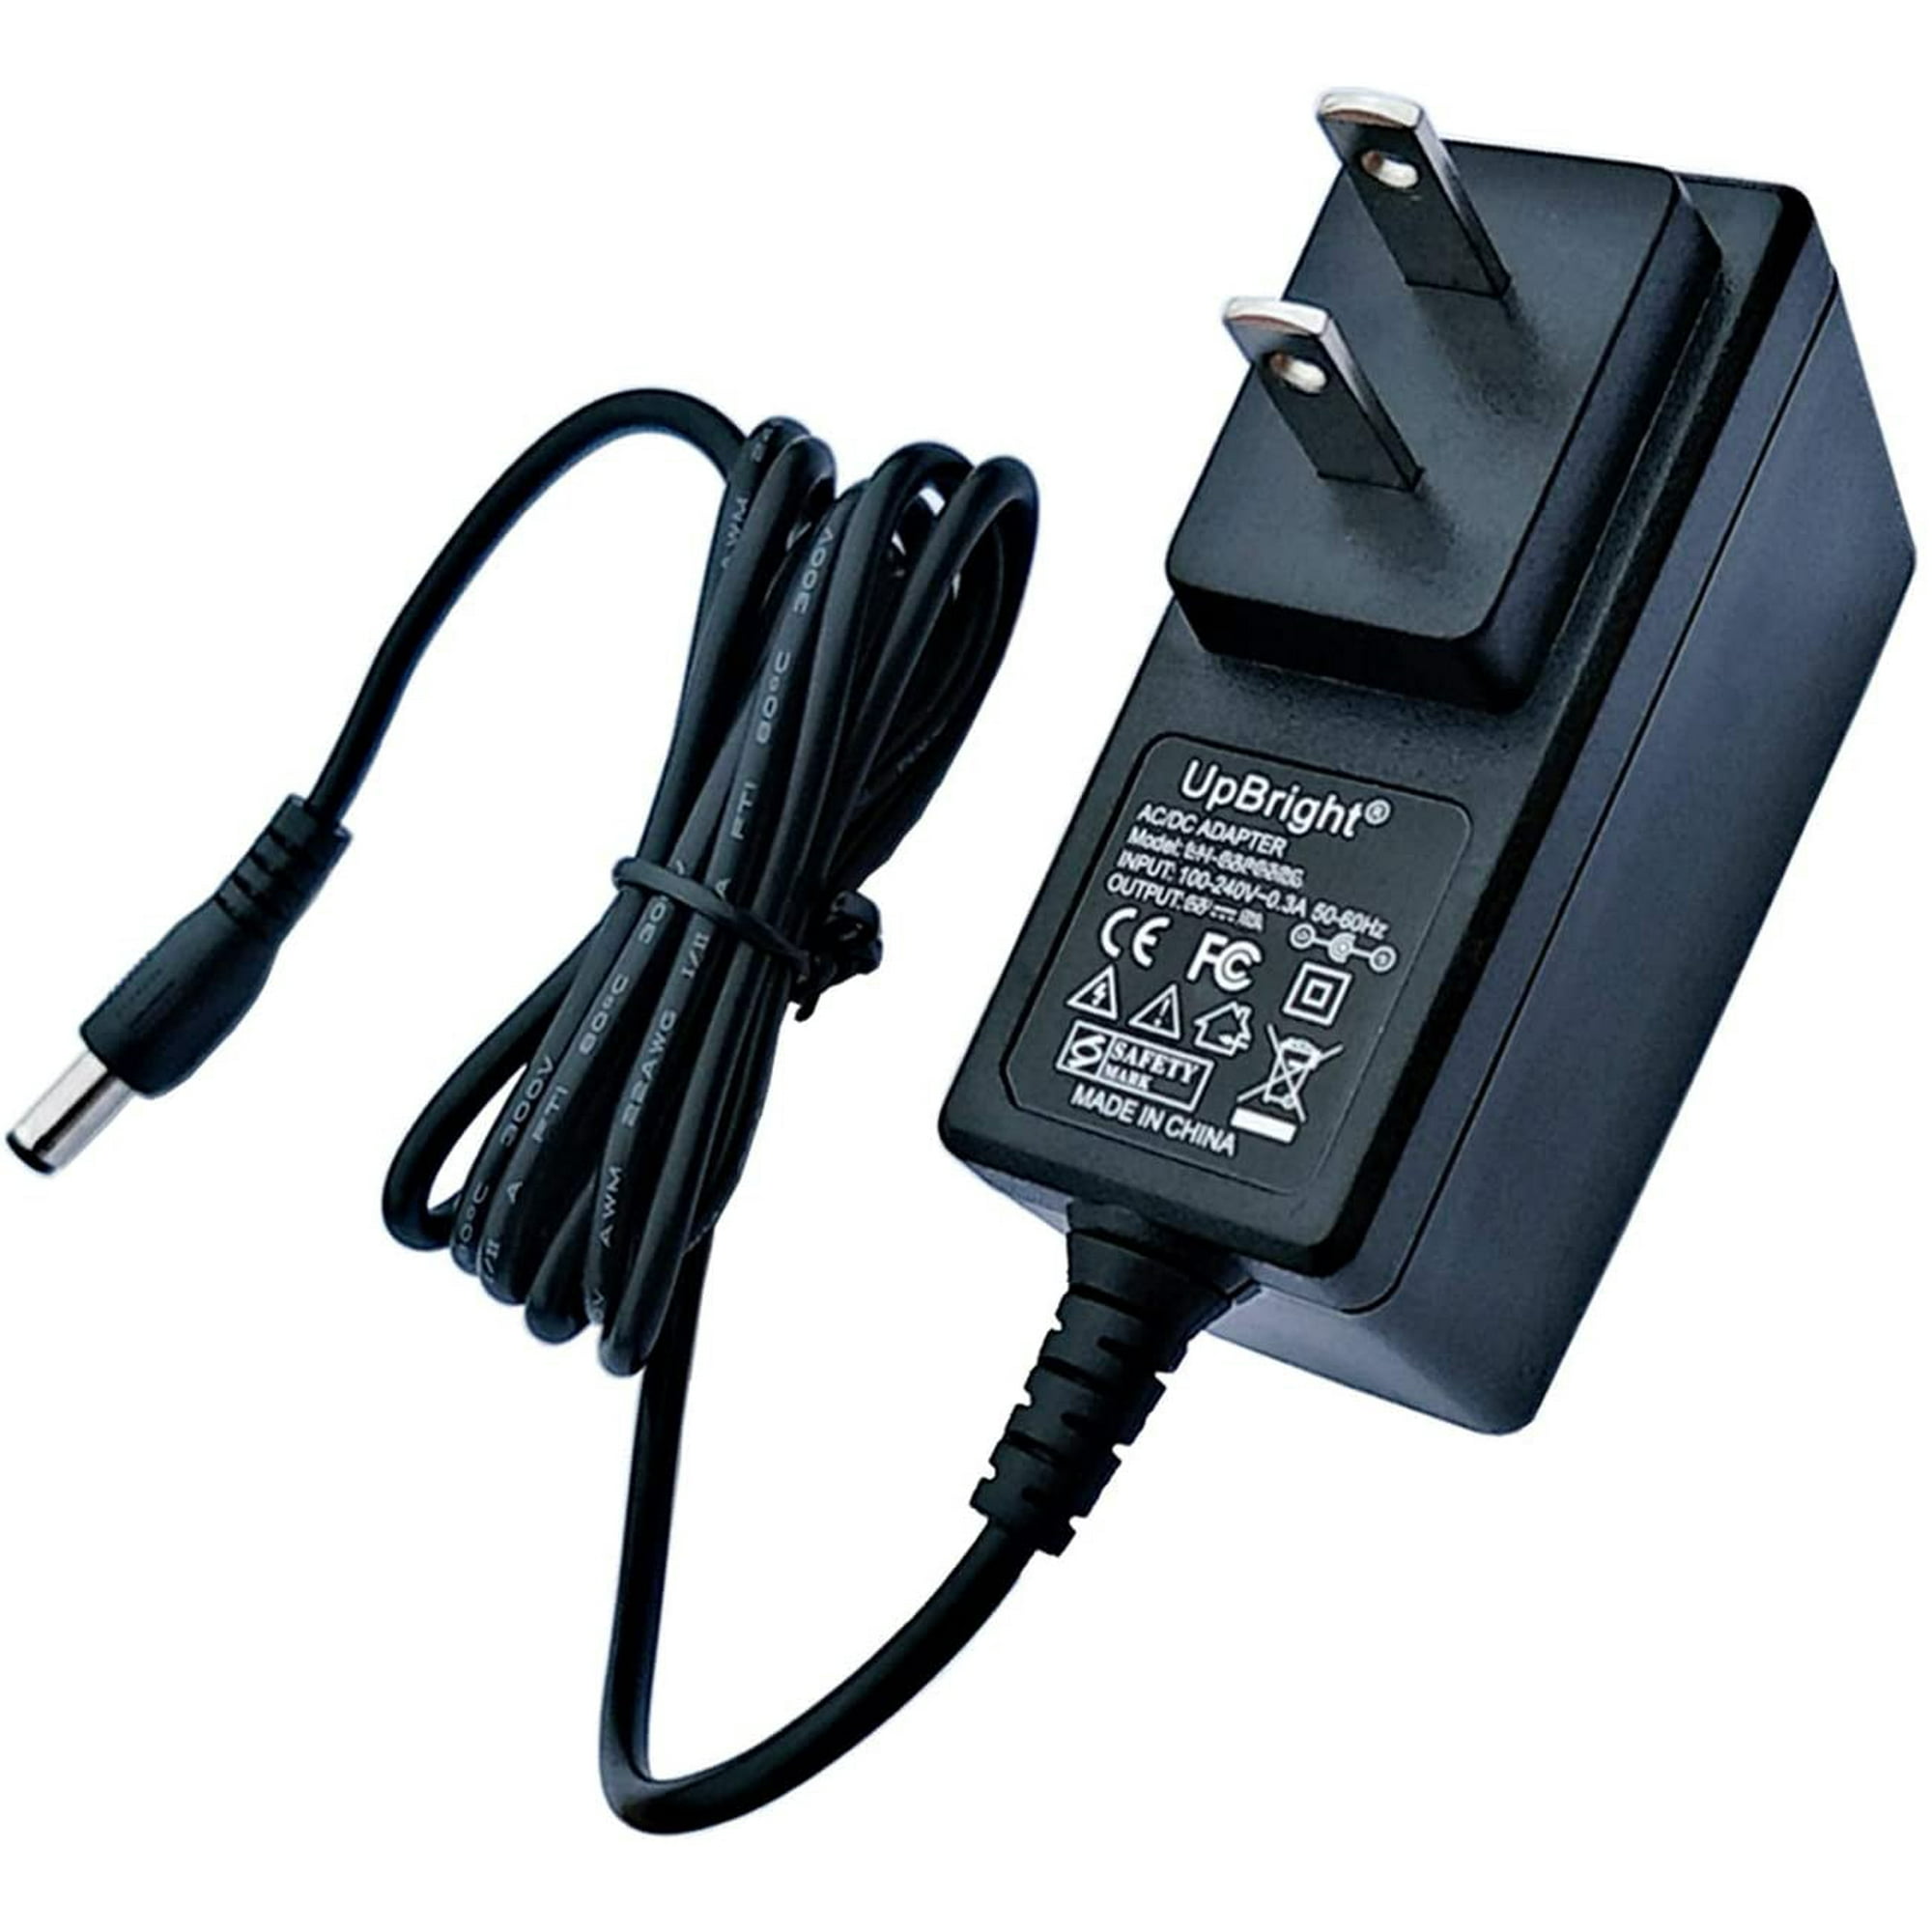 UpBright 5V AC/DC Adapter Compatible with Sony Playstation TV PS